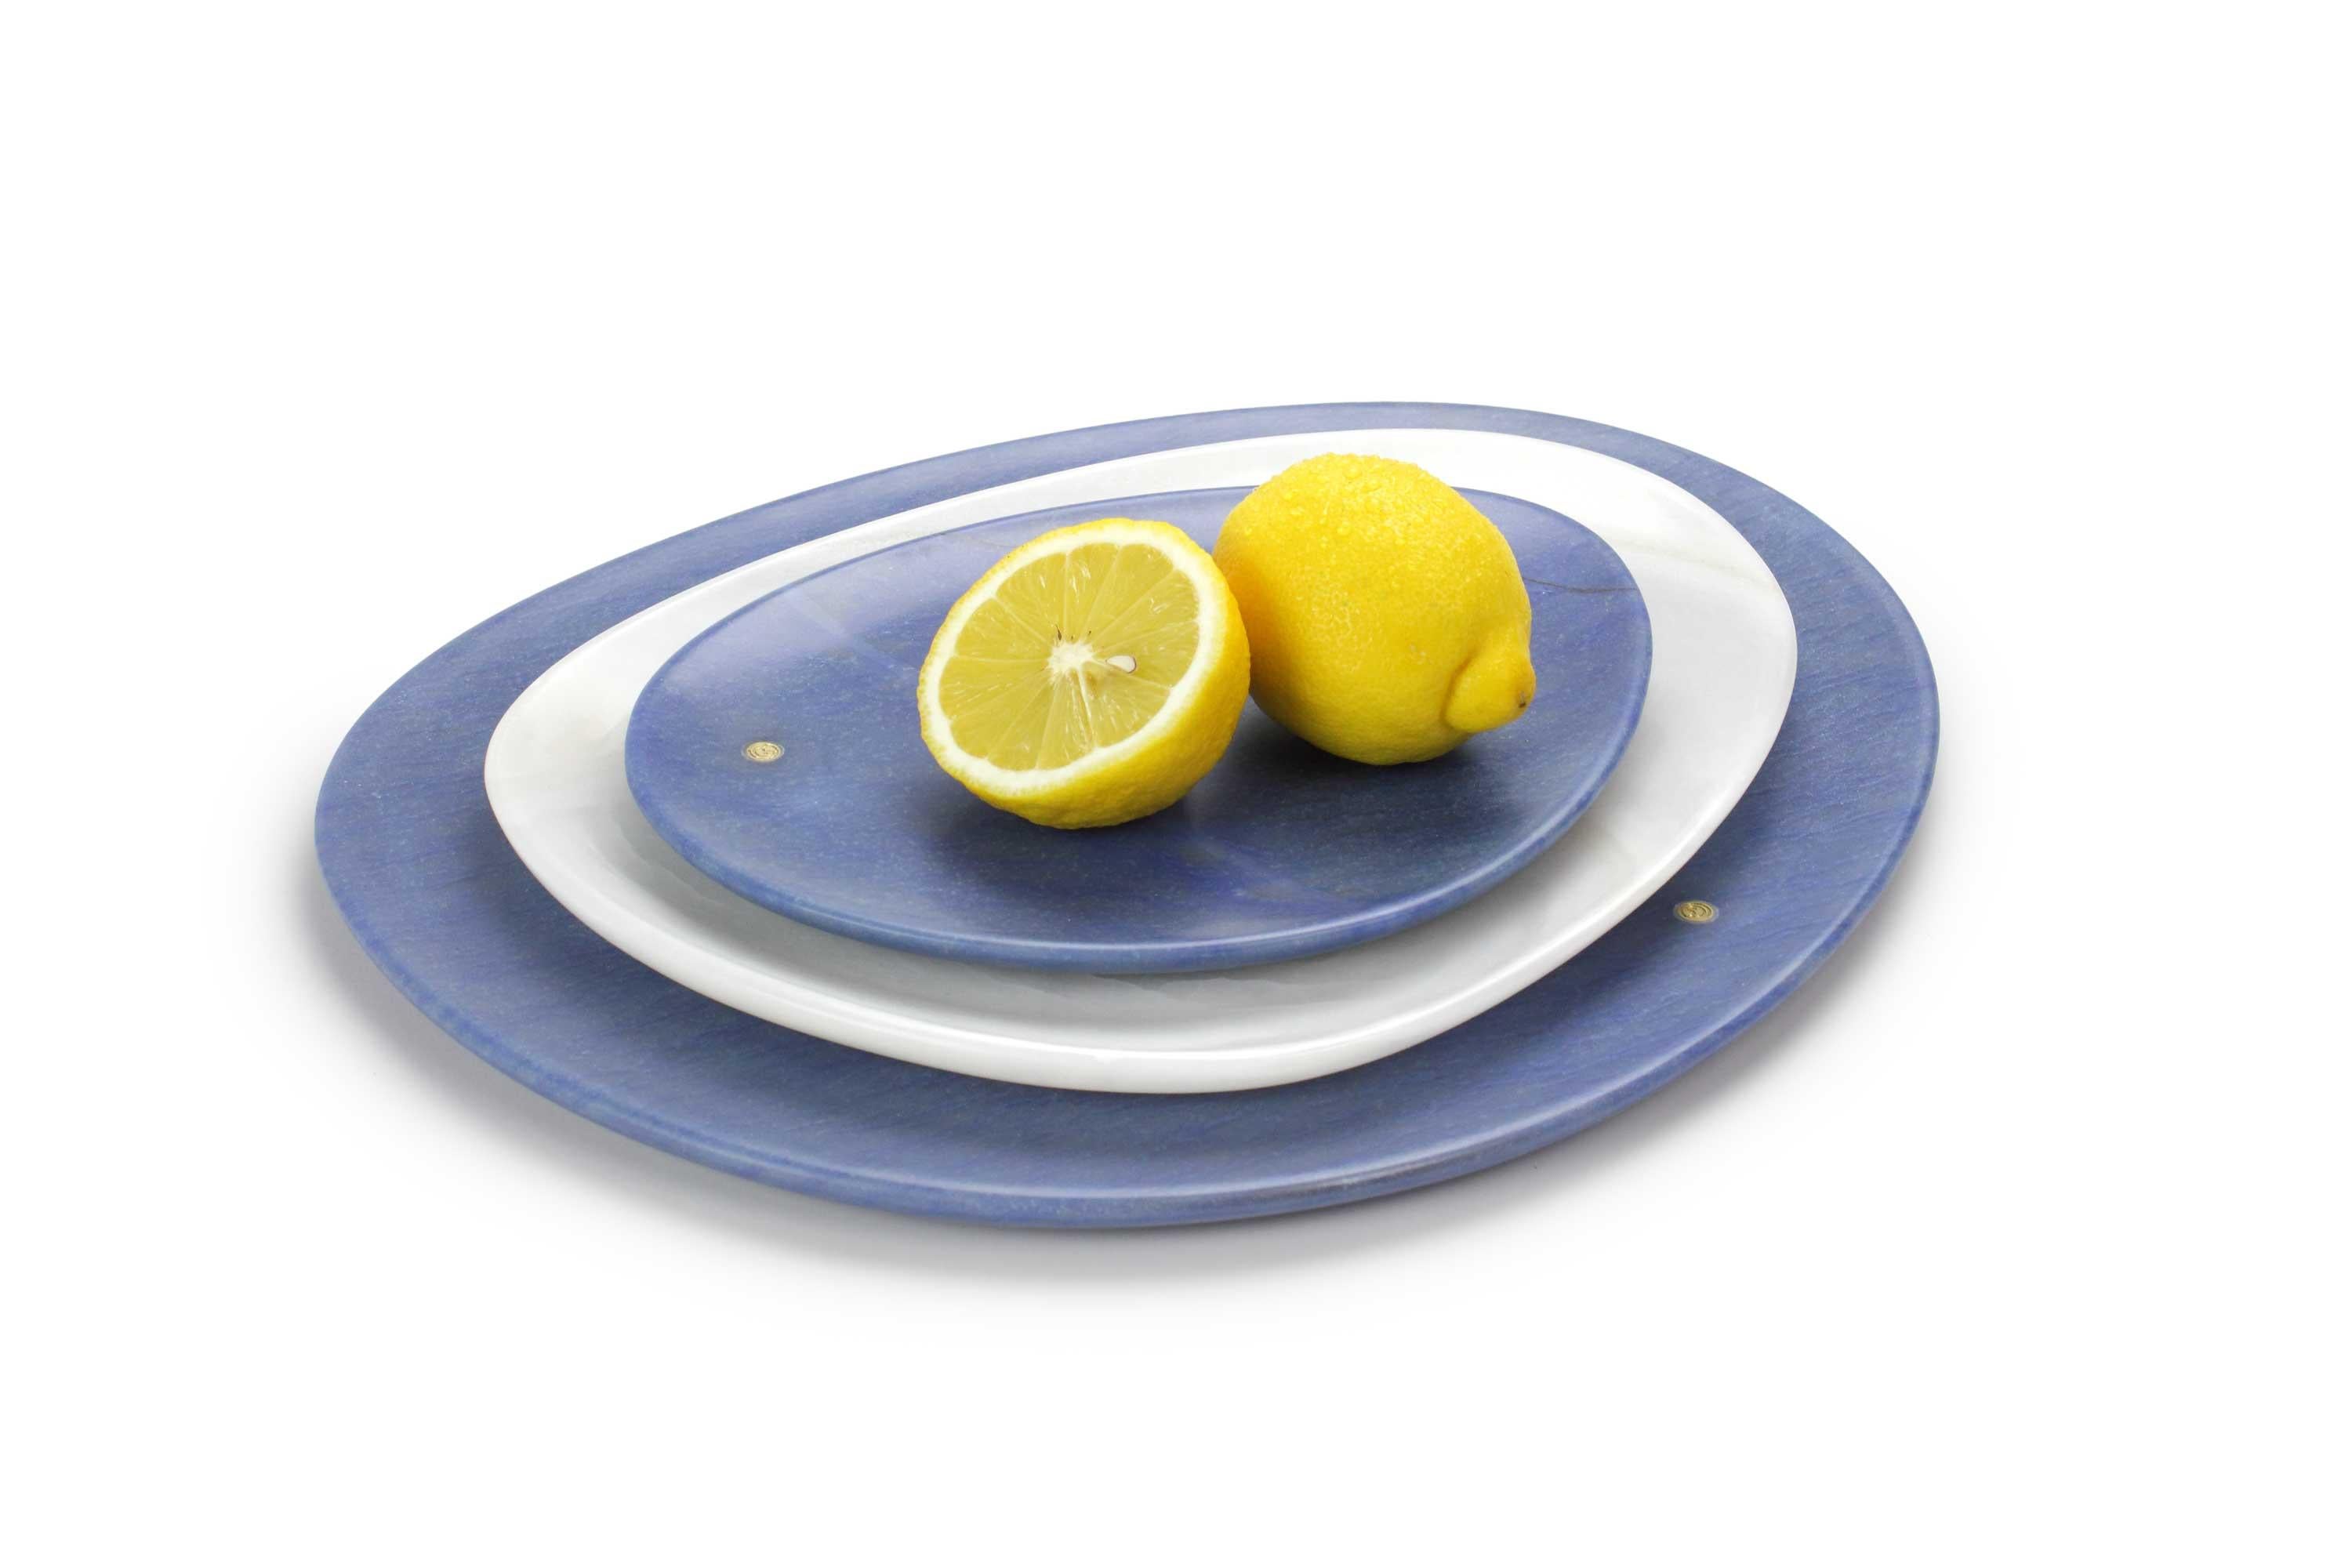 Hand carved presentation plates in extra blue Azul Macaubas and white onyx. Polished finishing. Multiple use as plates, platters and placers. 

Dimensions: Small – L 24, W 20, H 1.8 cm, medium – L 30, W 28, H 1.8 cm, big – L 36, W 35, H 1.8